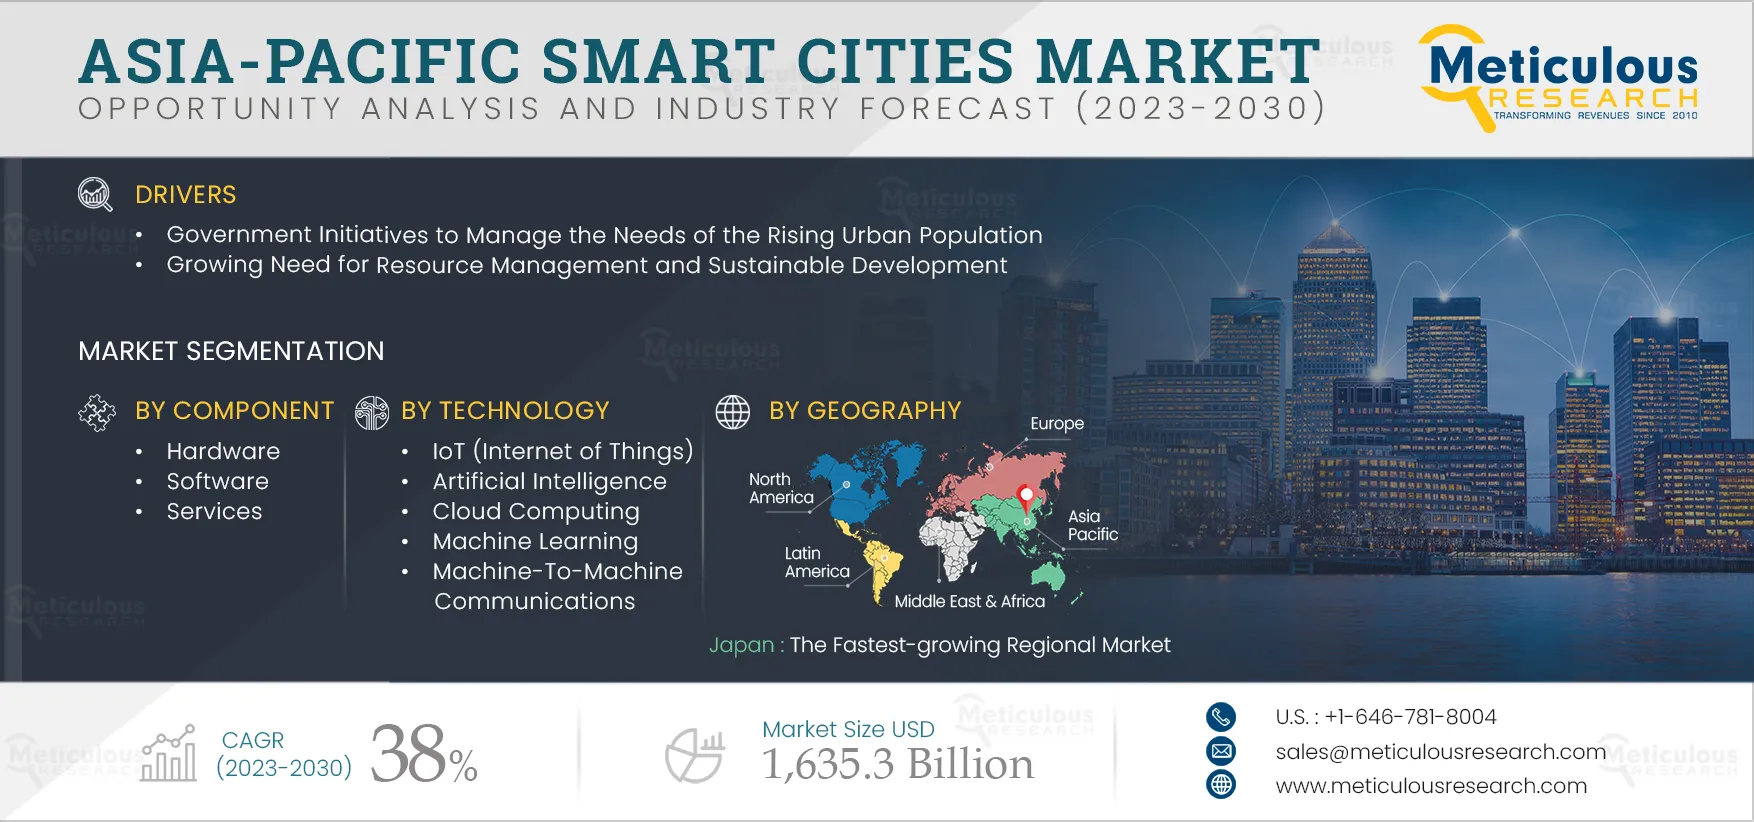 Asia-Pacific Smart Cities Market